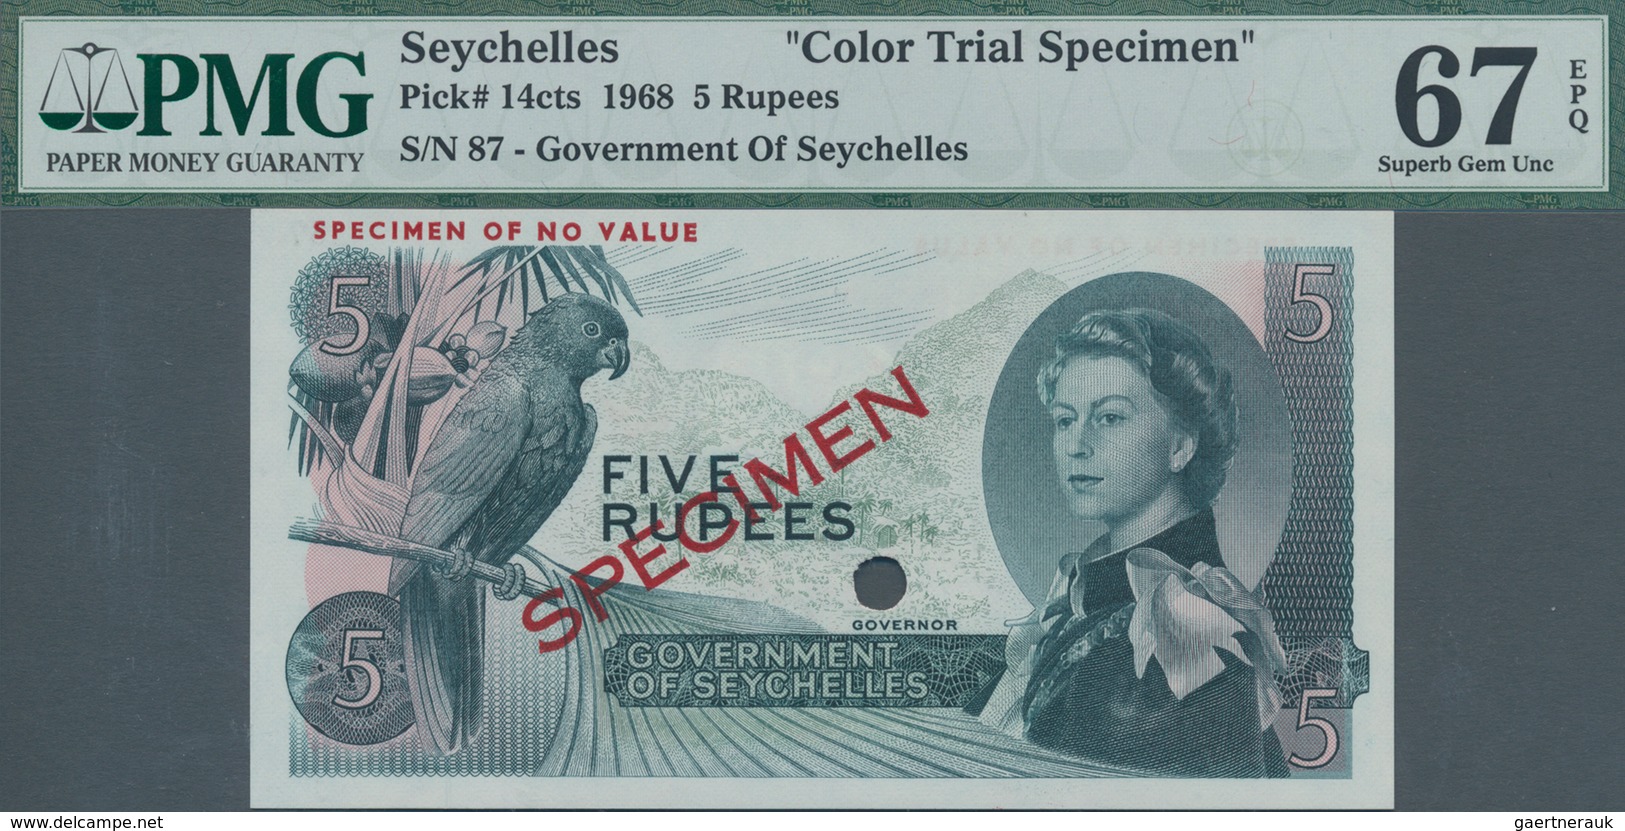 Seychelles / Seychellen: Government Of Seychelles 5 Rupees 1968 Color Trial SPECIMEN, P.14cts, PMG G - Seychelles